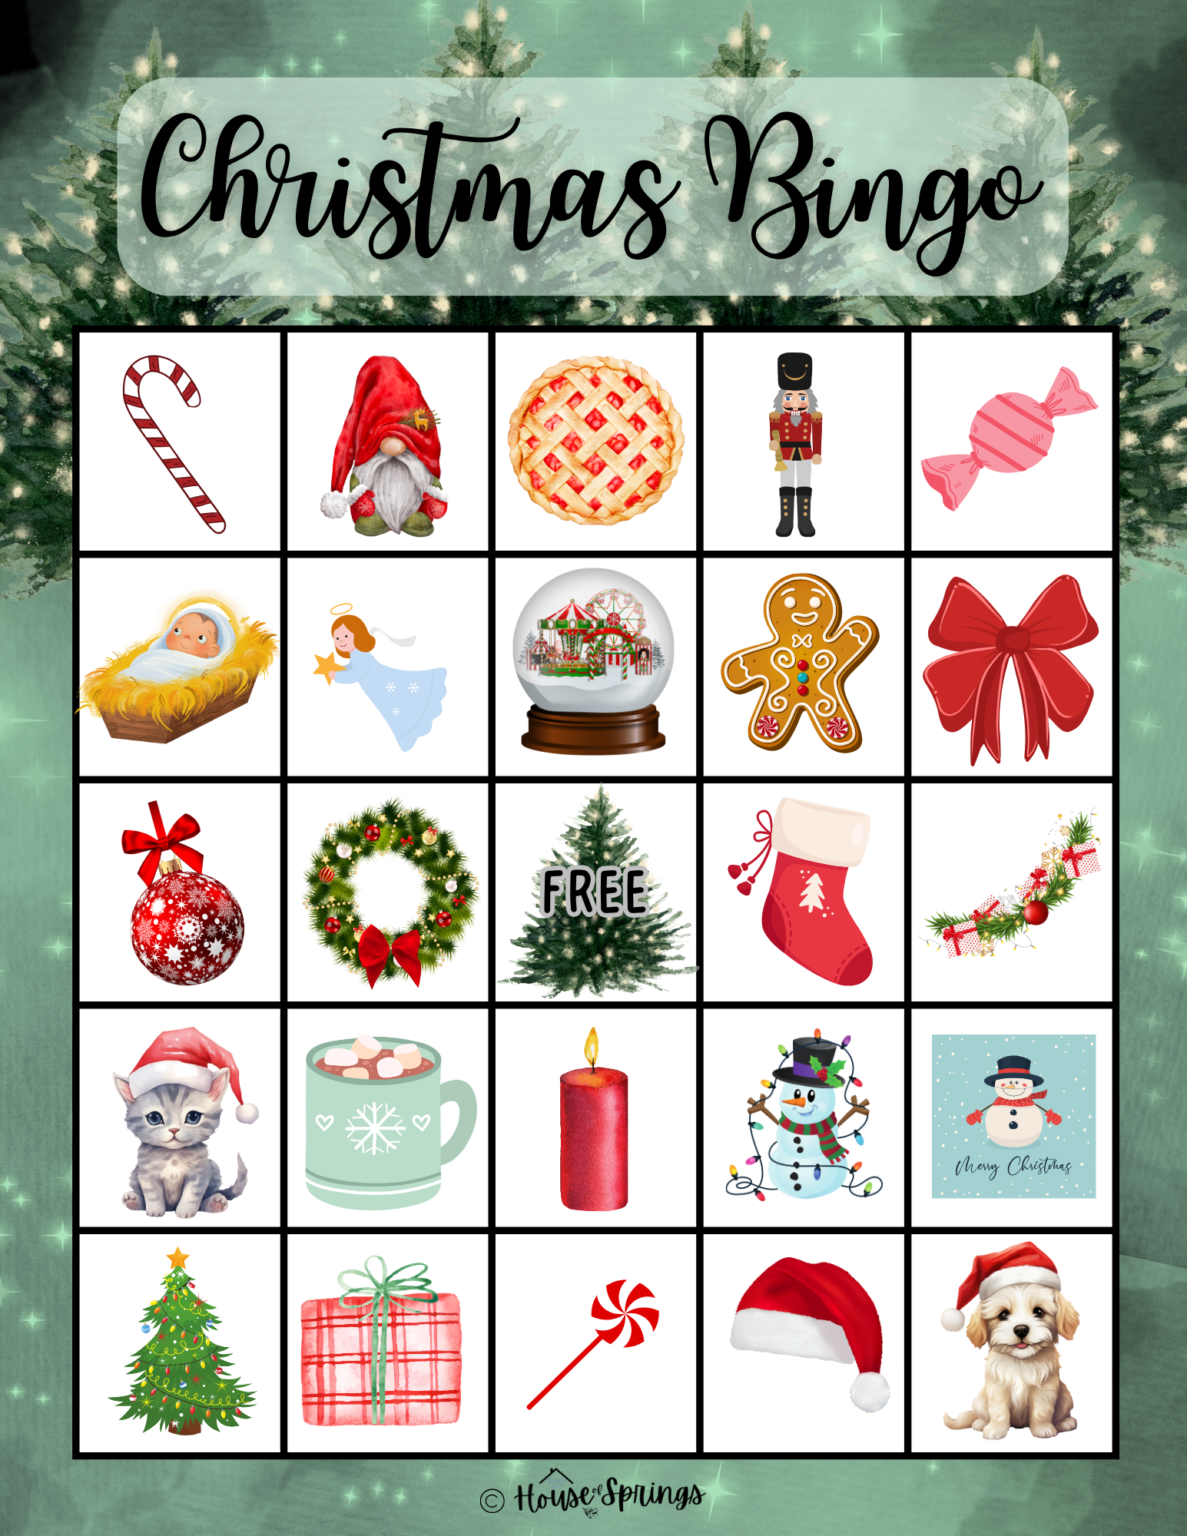 Free Christmas Bingo Game For Families - House Of Springs